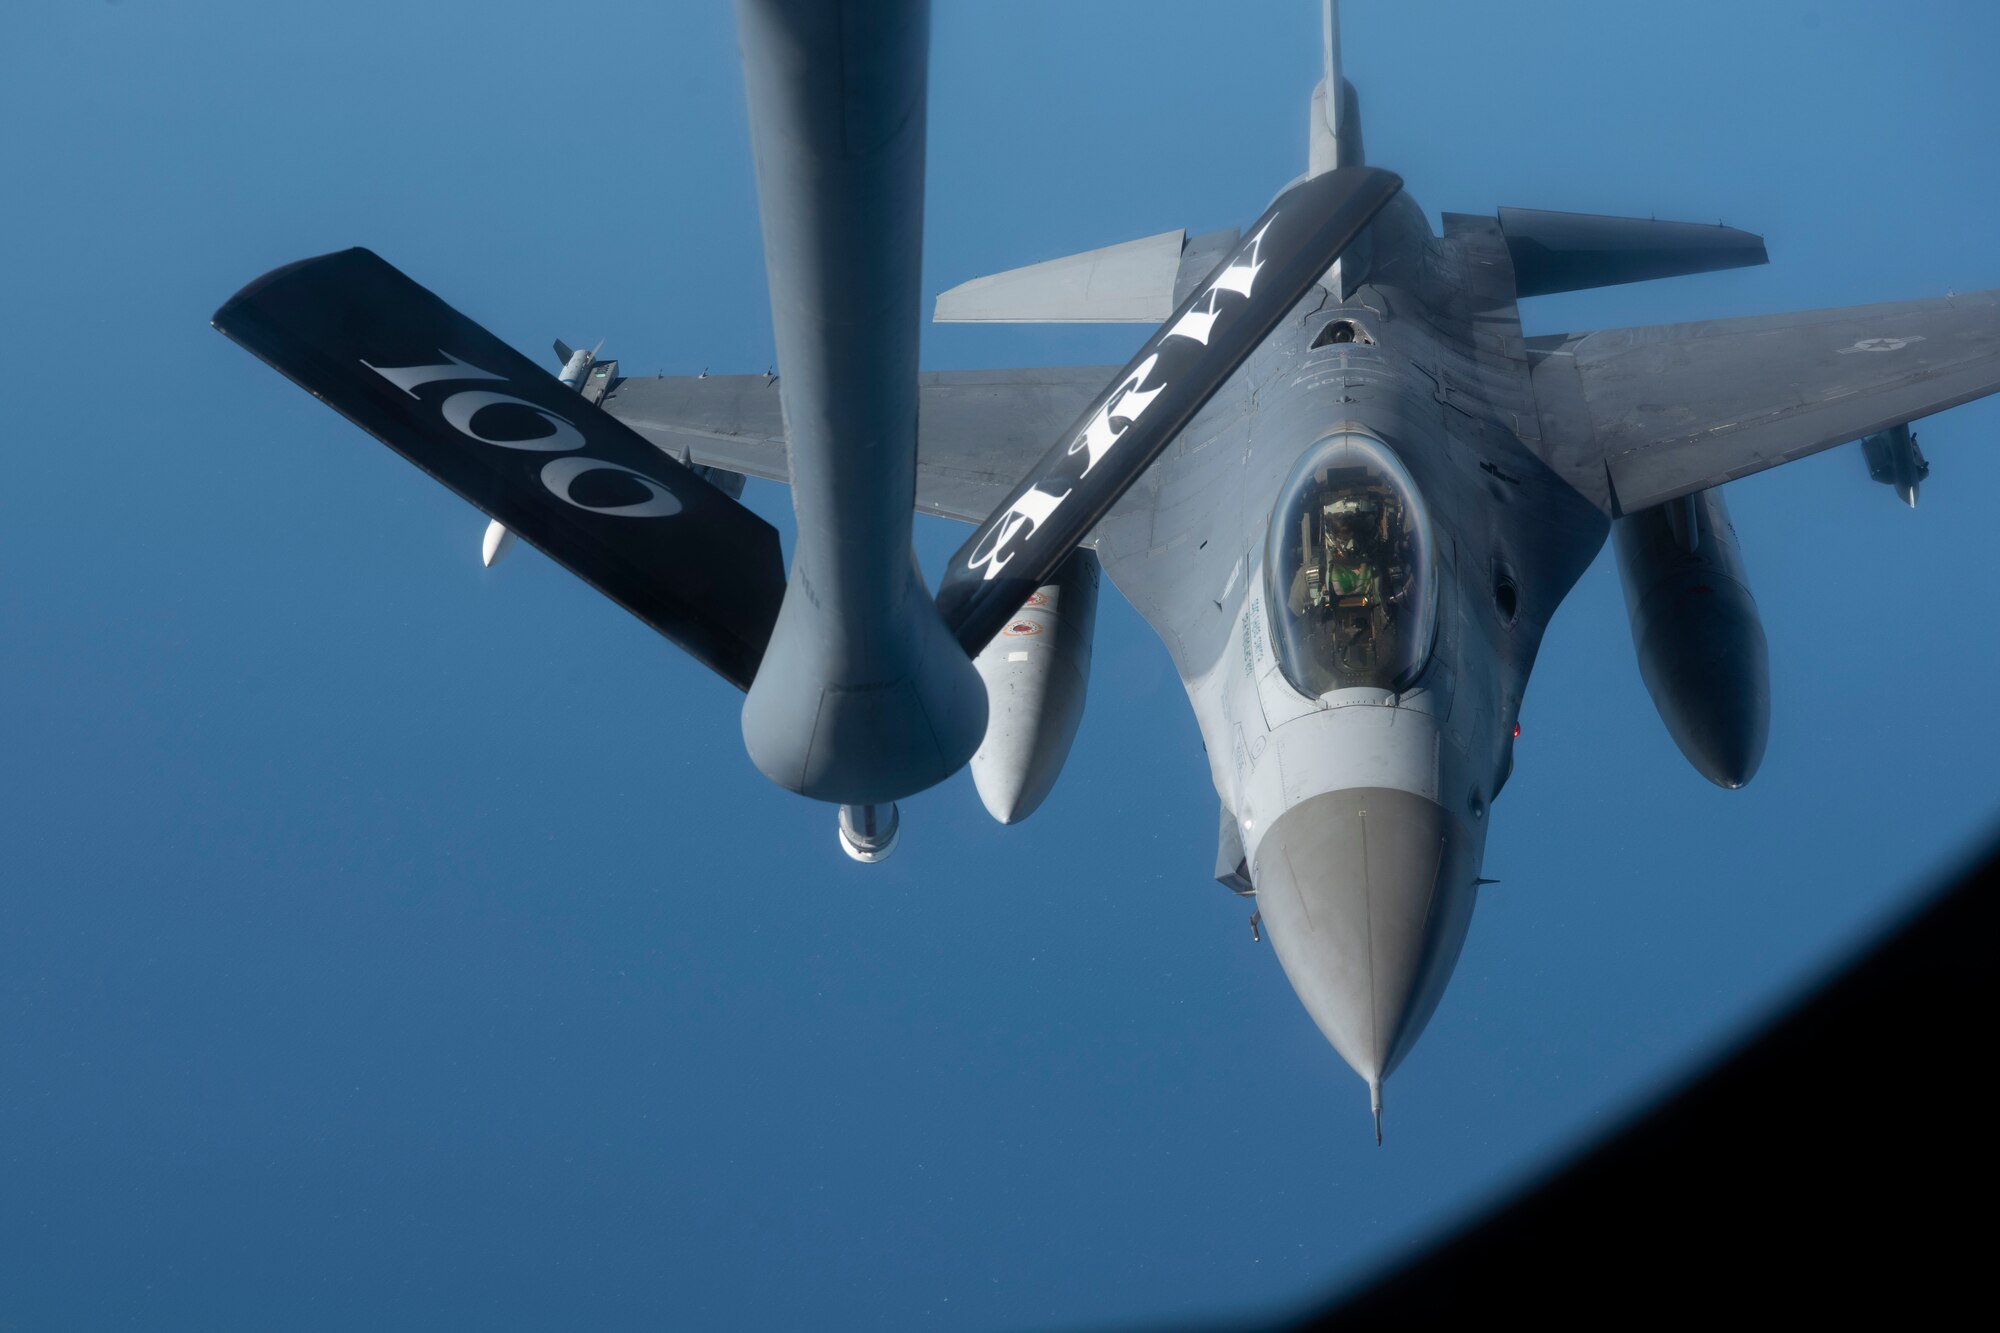 A U.S. Air Force F-16C Fighting Falcon aircraft assigned to the 31st Fighter Wing approaches a KC-135 Stratotanker aircraft assigned to the 100th Air Refueling Wing over the North Sea during exercise Cobra Warrior 22, Sept. 21, 2022. The partnerships created through recurring training events like Cobra Warrior, better support the ability to employ a strategic force in theater whenever called upon. (U.S. Air Force photo by Tech. Sgt. Anthony Hetlage)